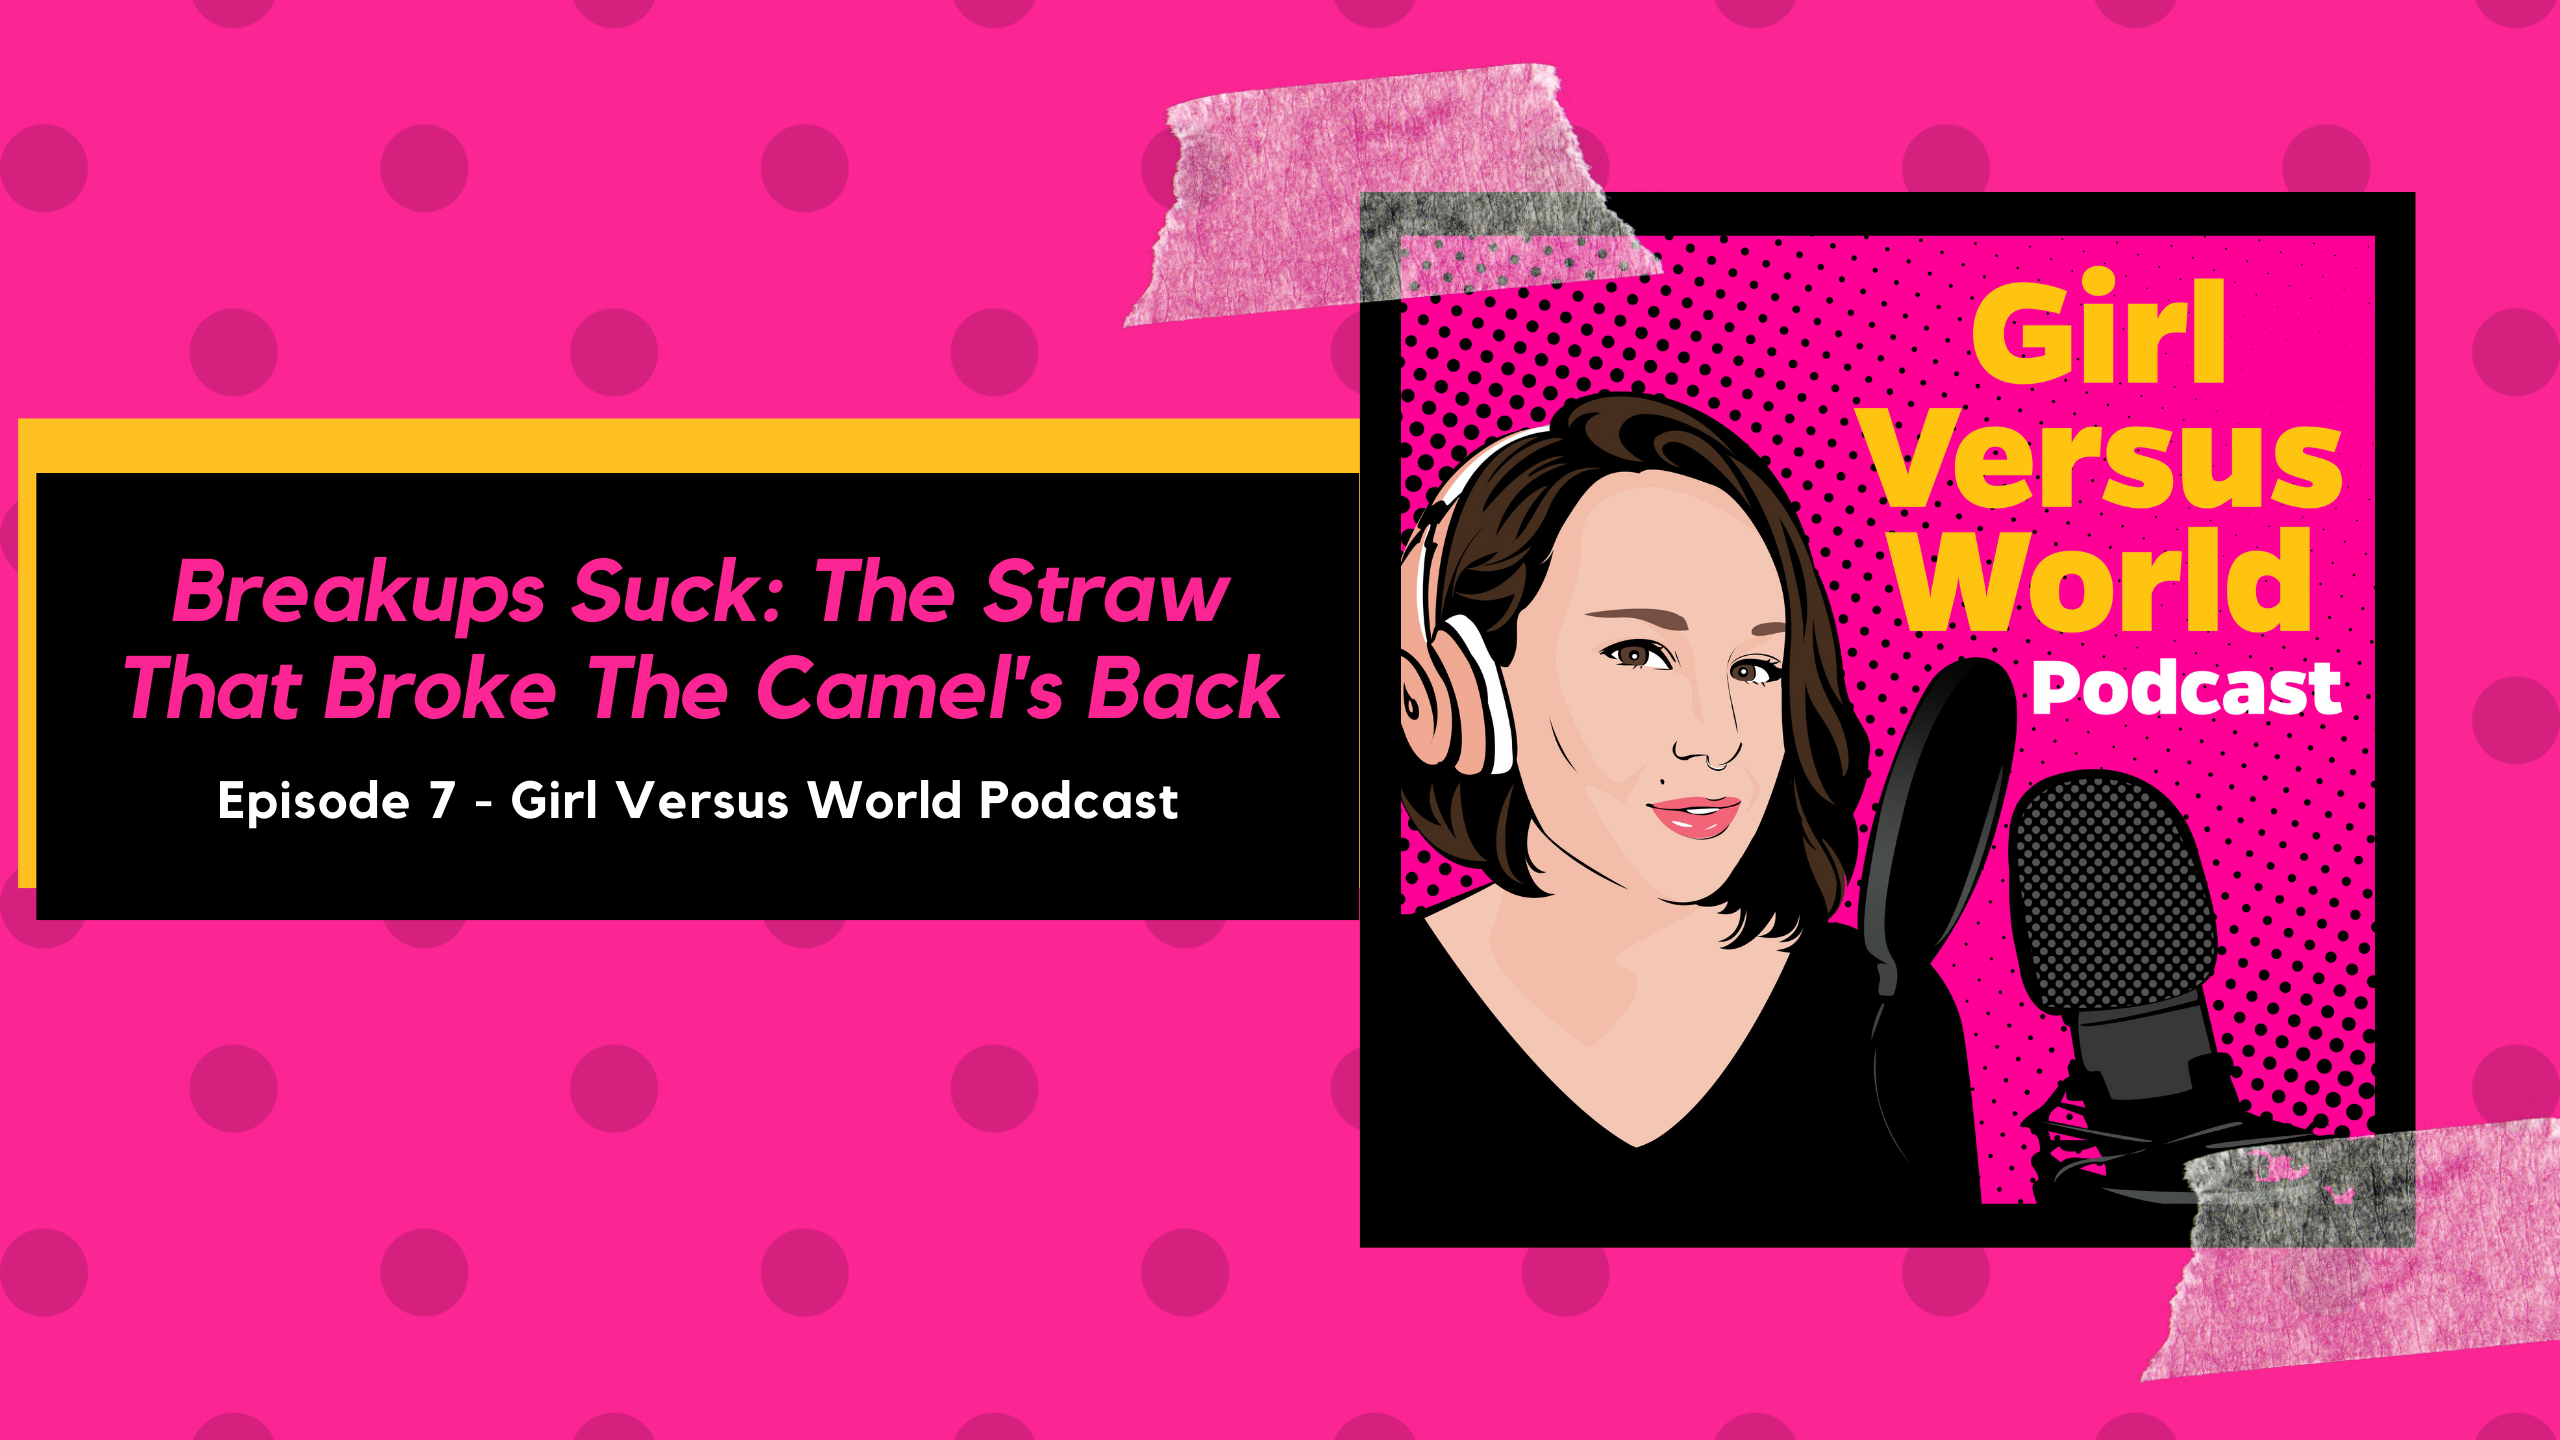 Podcast Episode 7: Breakups Suck – The Straw That Broke The Camels Back